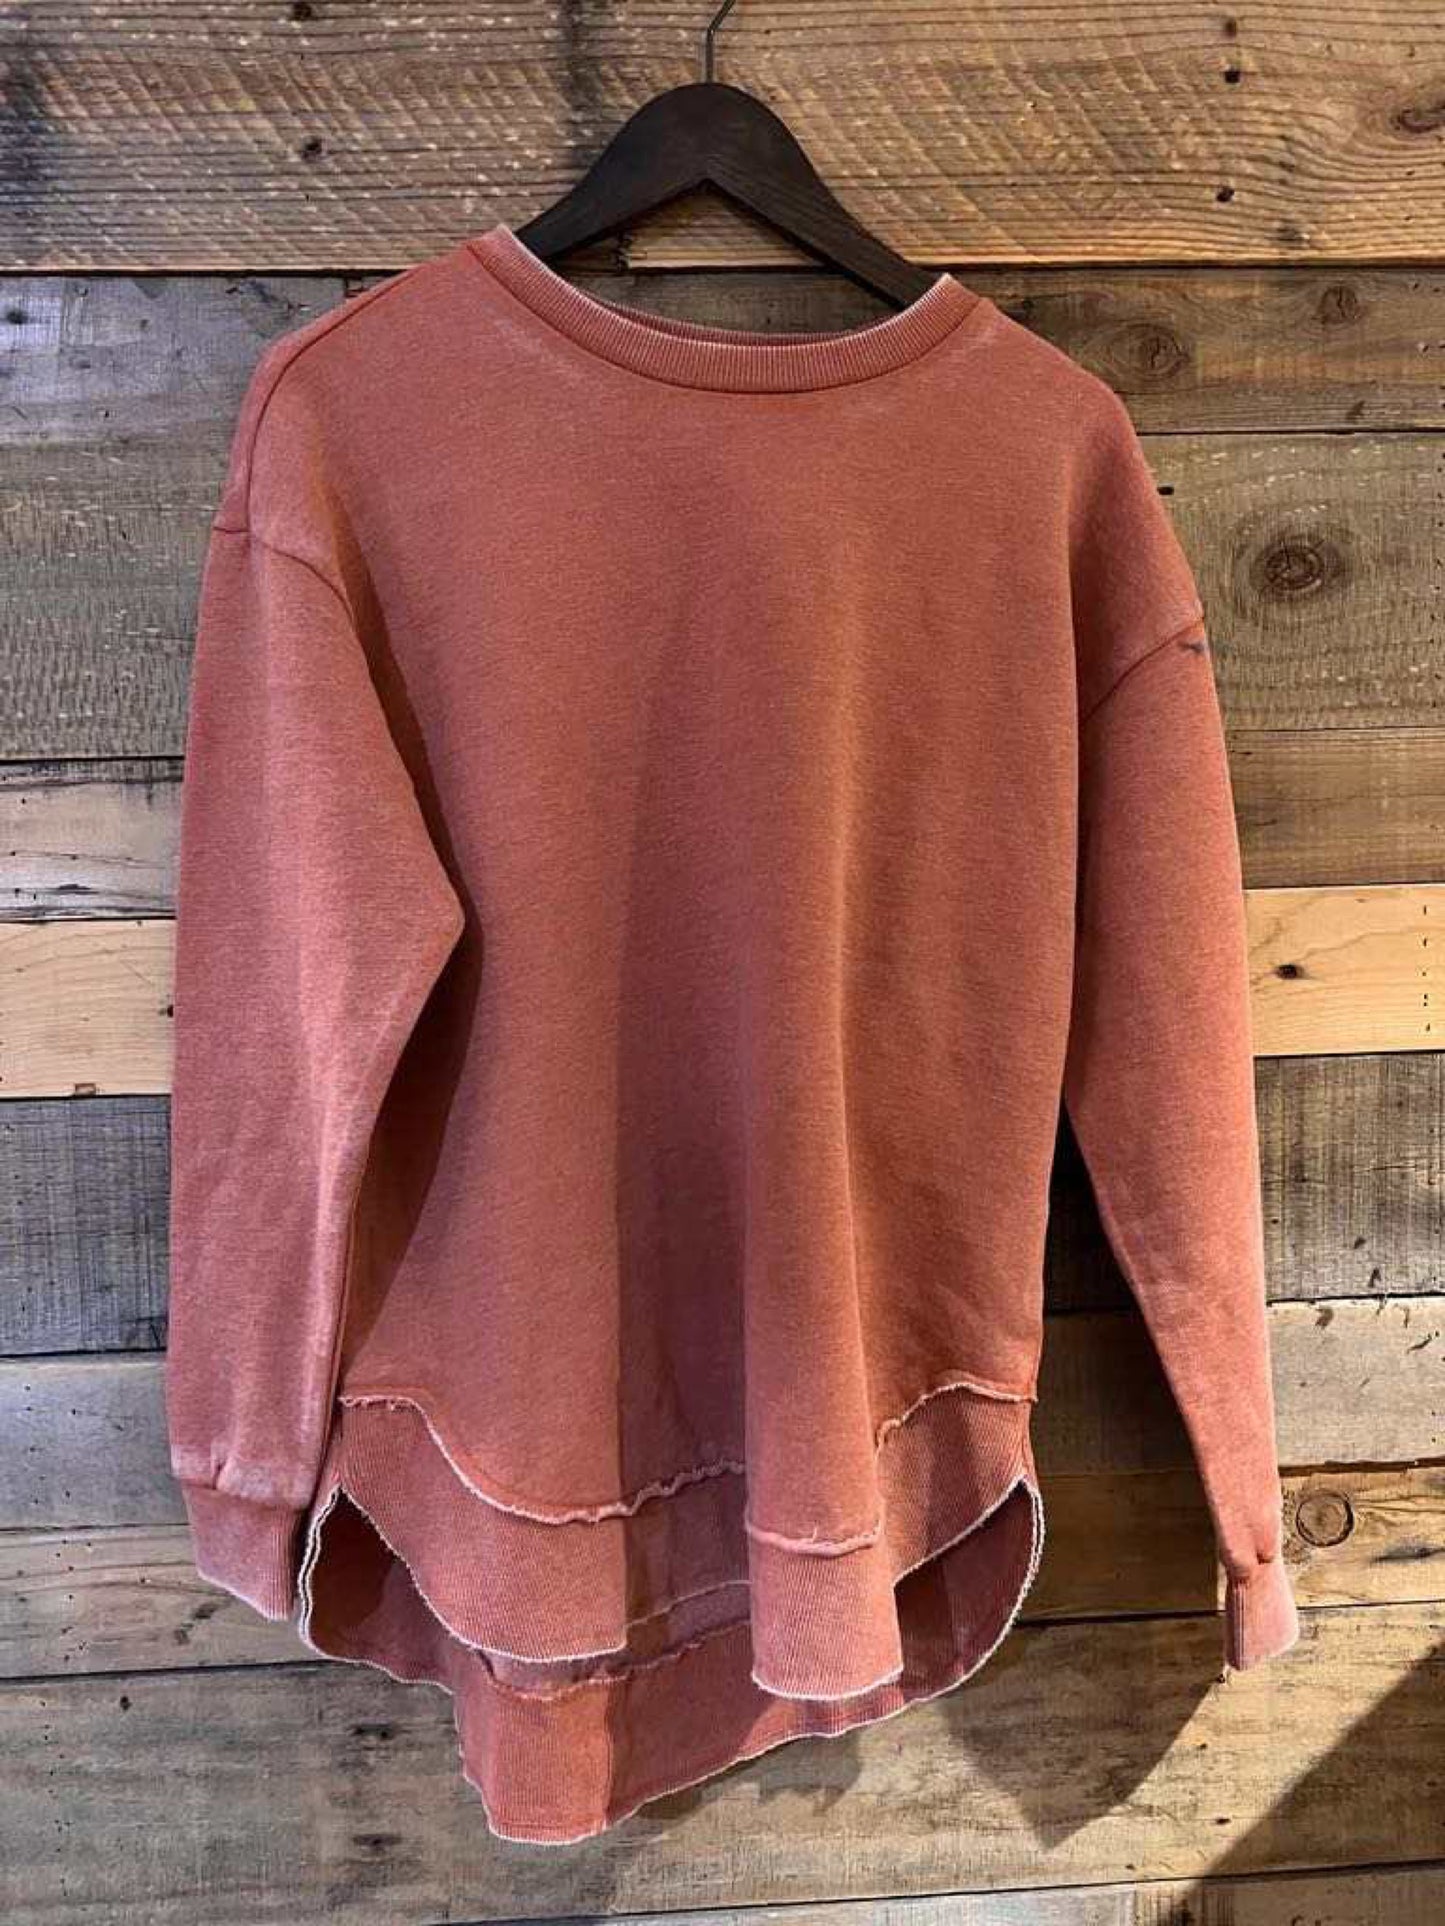 The Cozy Fall Sweater